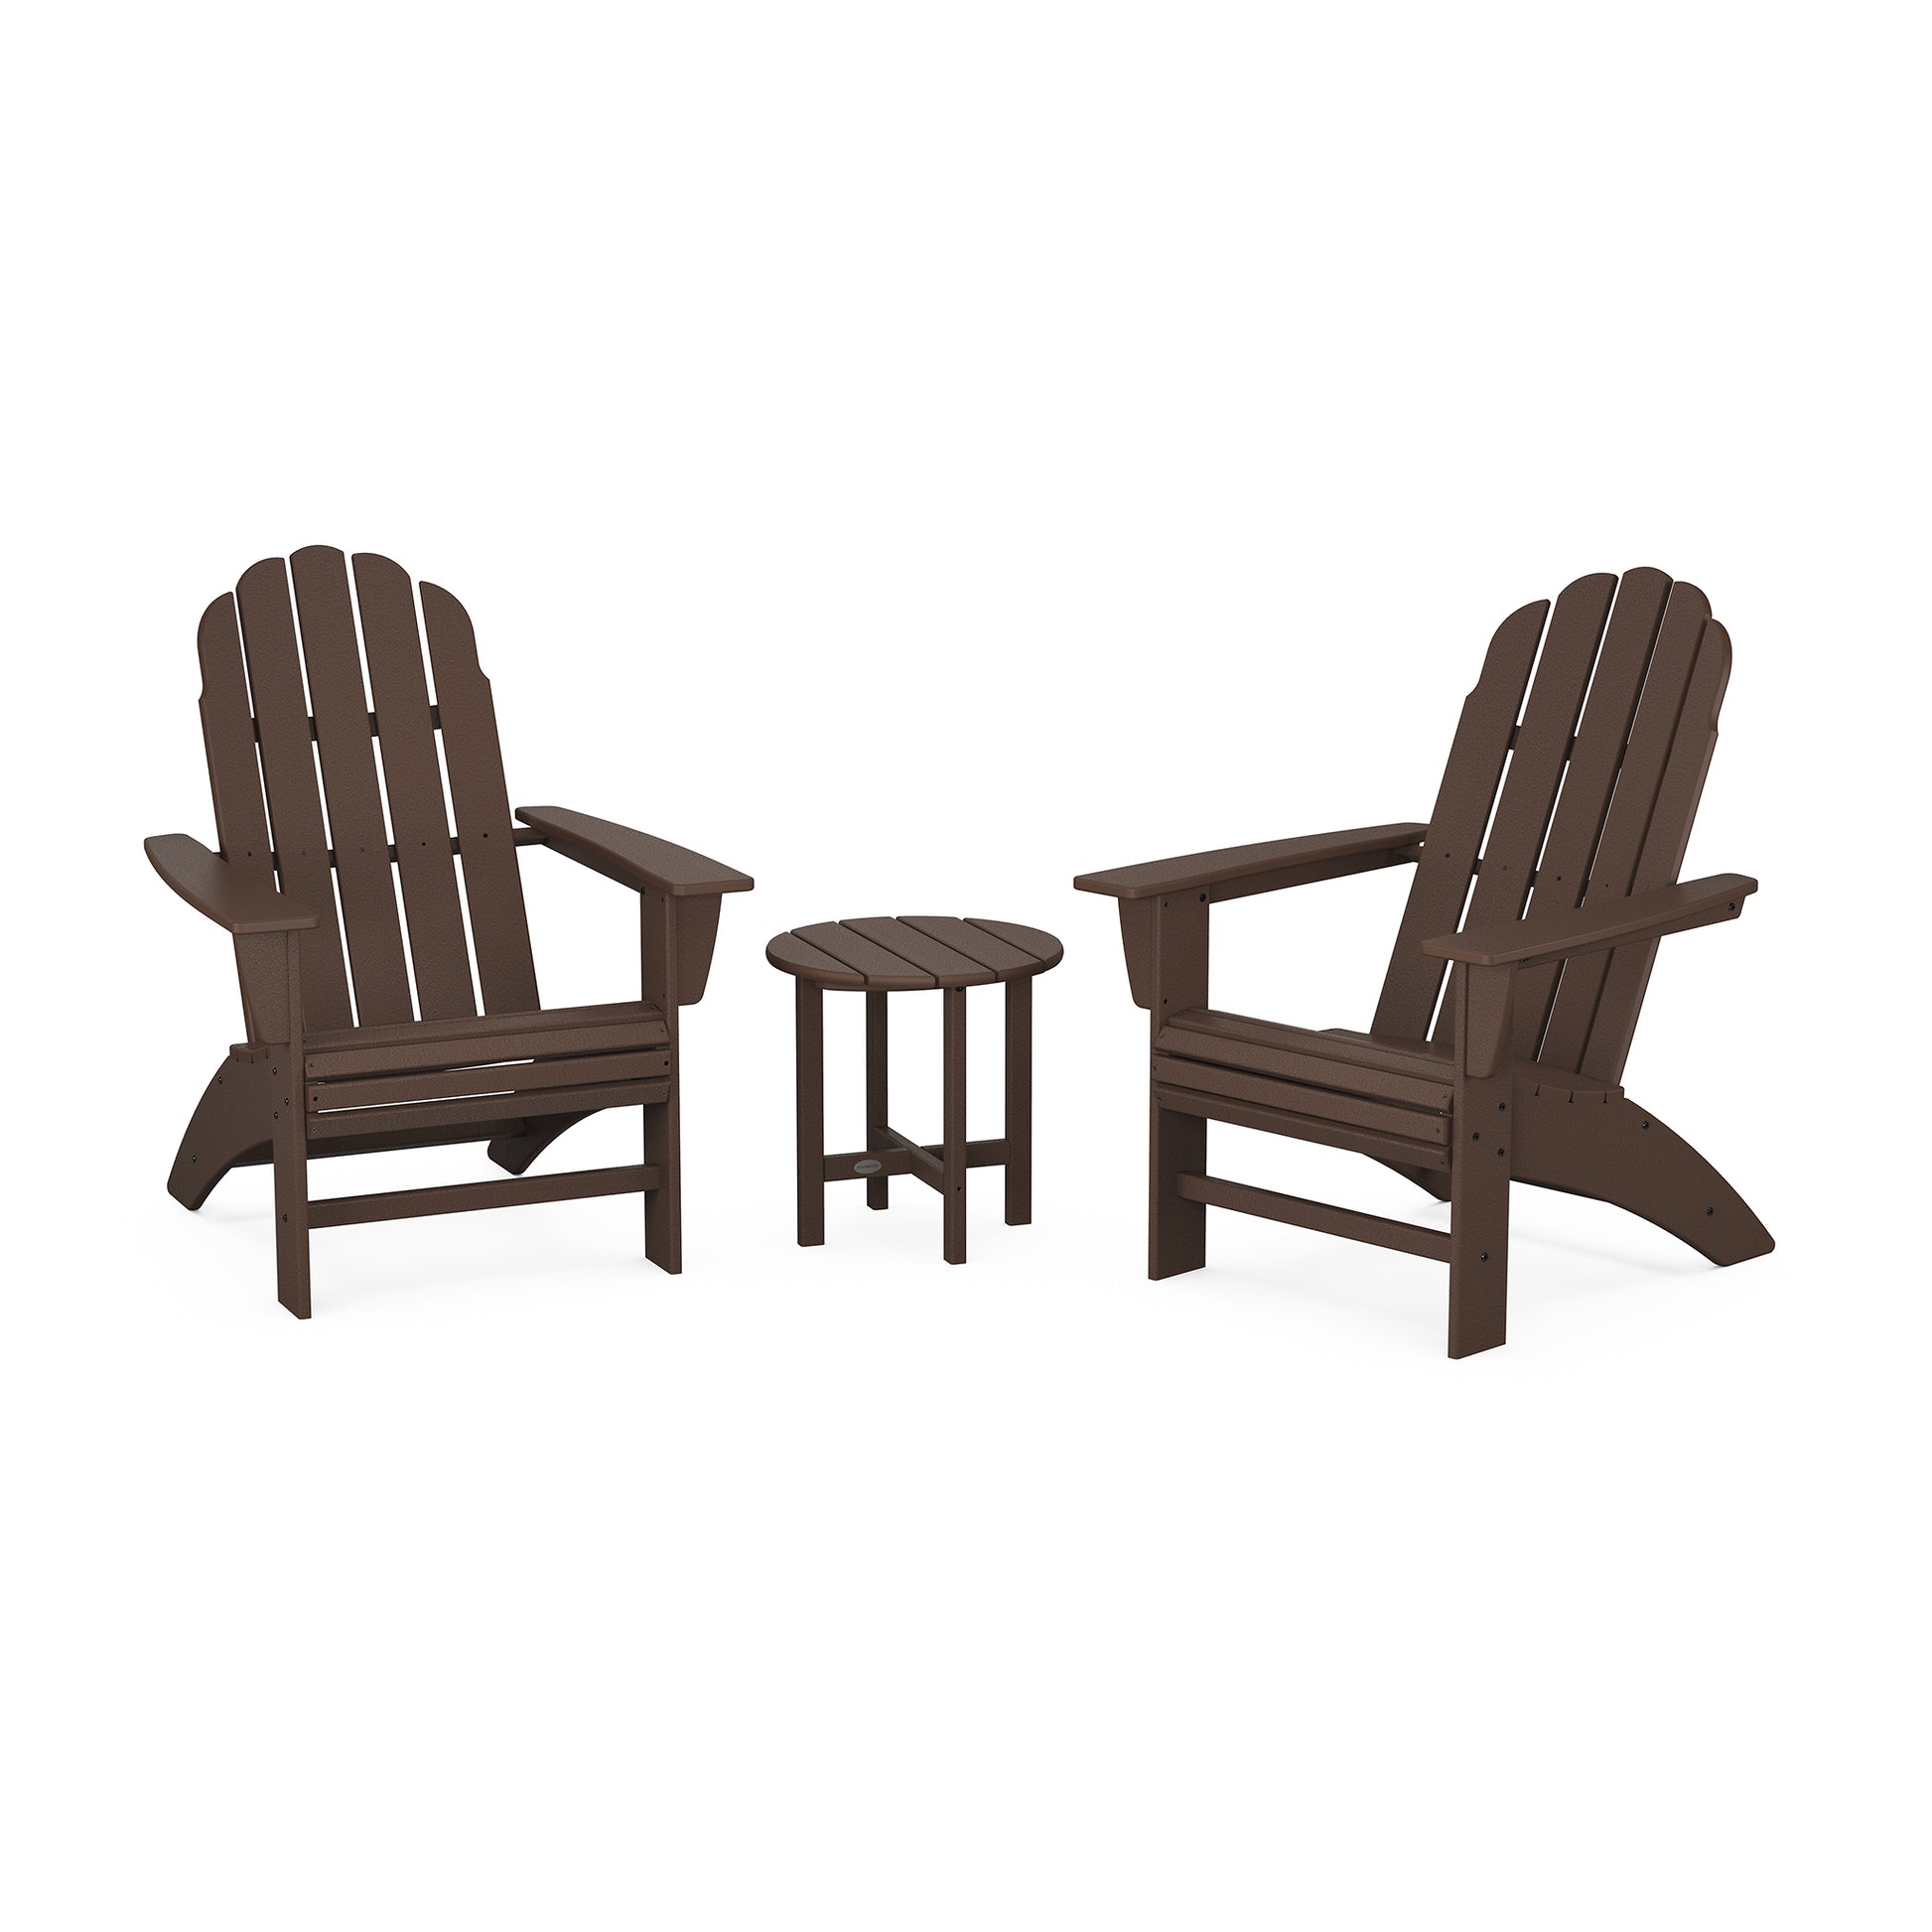 Two weather-resistant brown POLYWOOD Vineyard 3-Piece Curveback Adirondack chairs with a matching small round table set on a plain white background, designed for outdoor seating.